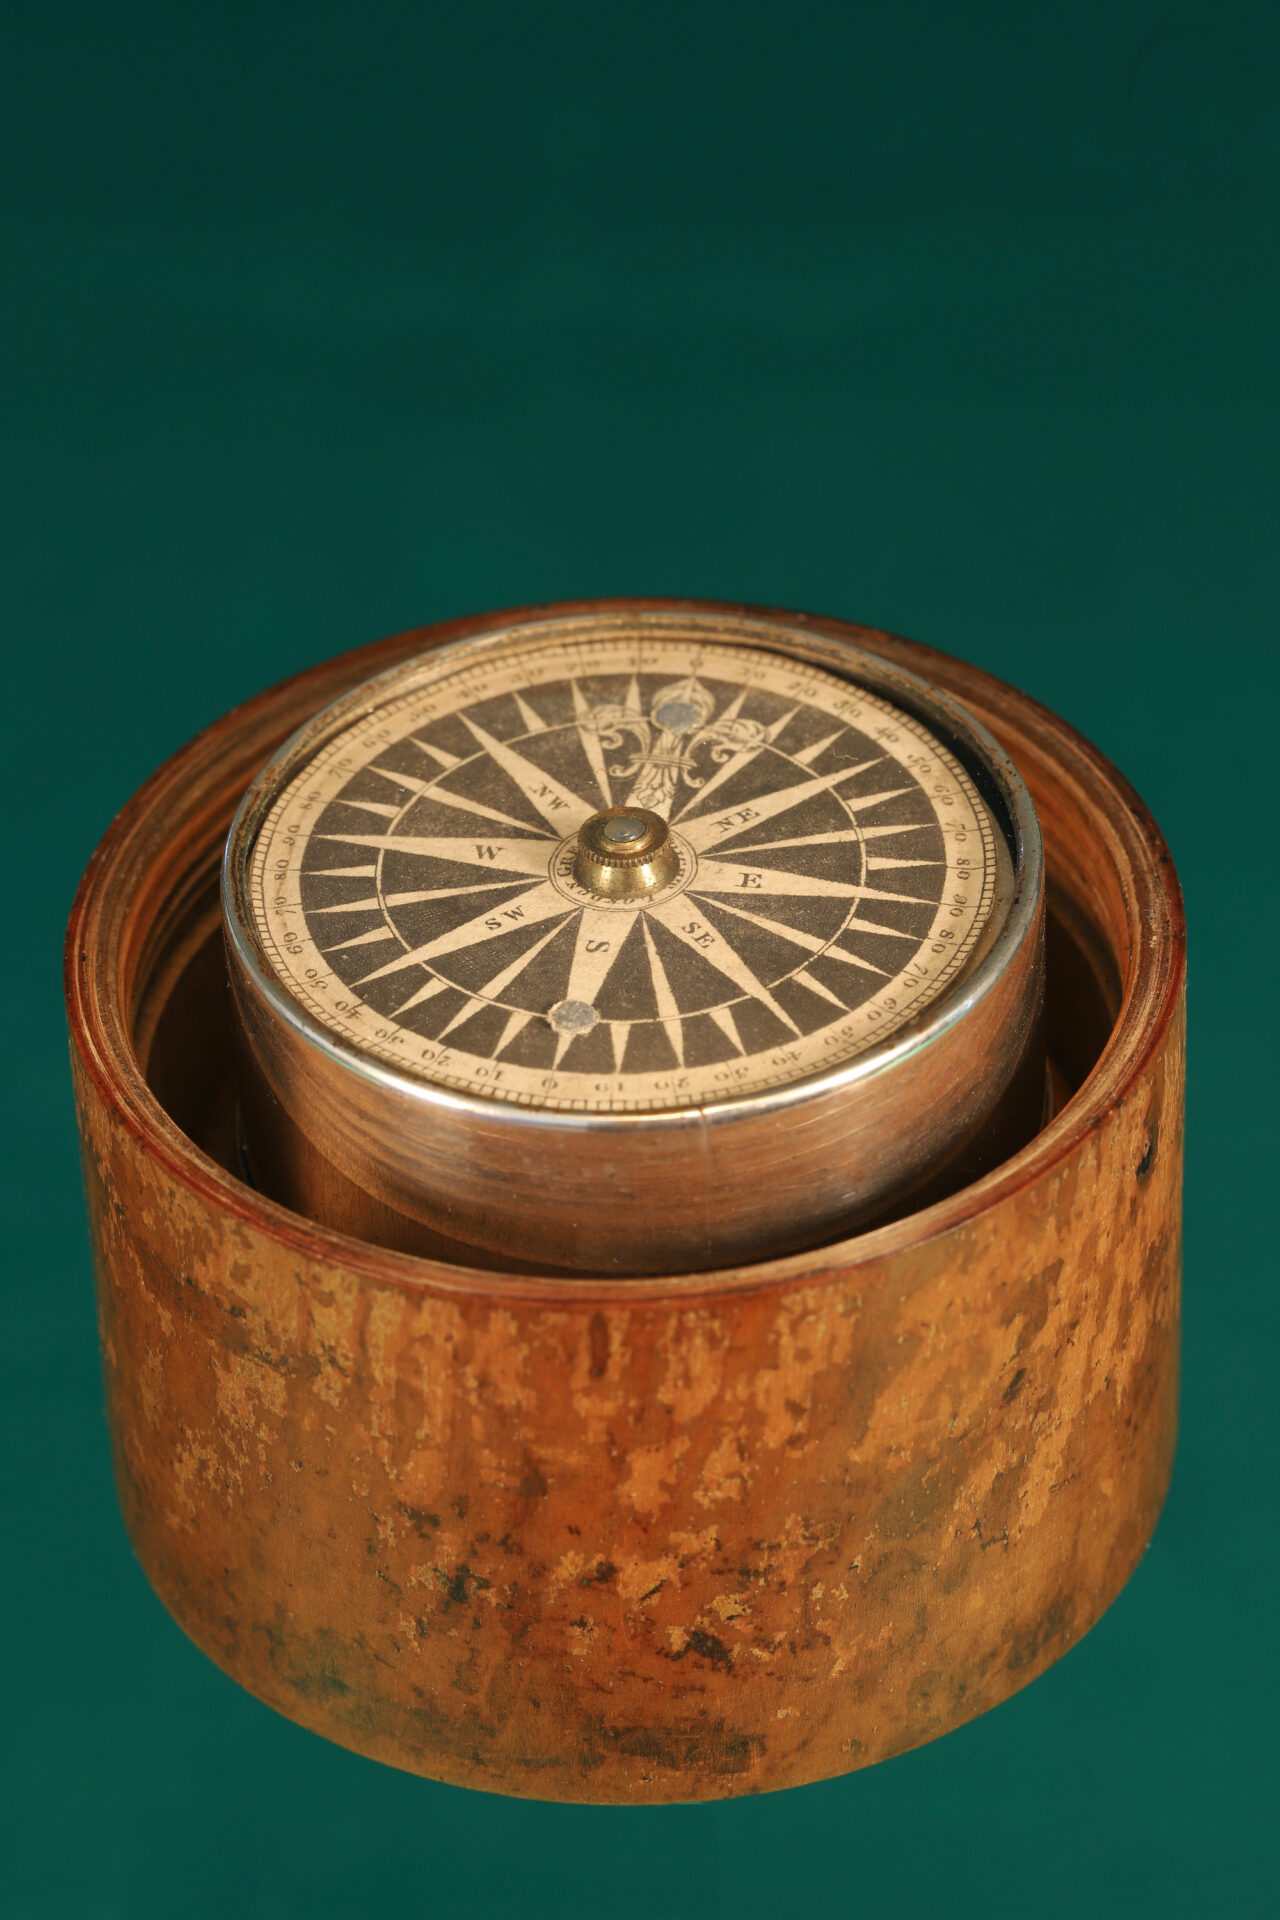 Gregory & Wright Gimballed Mariners Compass c1785